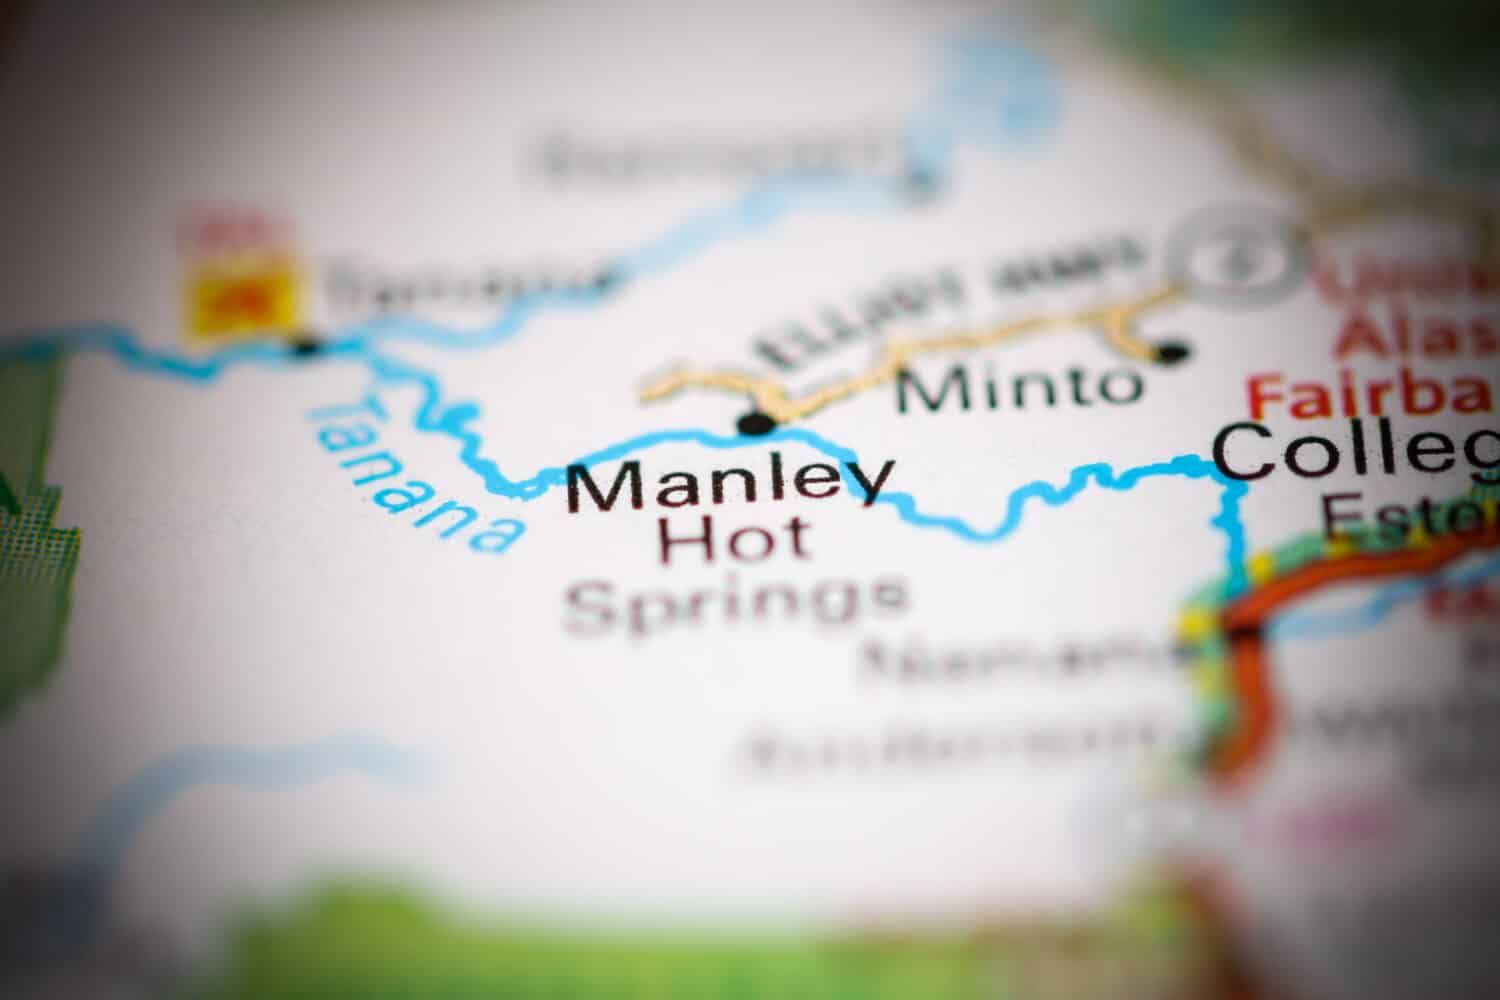 Manley Hot Springs. Alaska. USA on a geography map